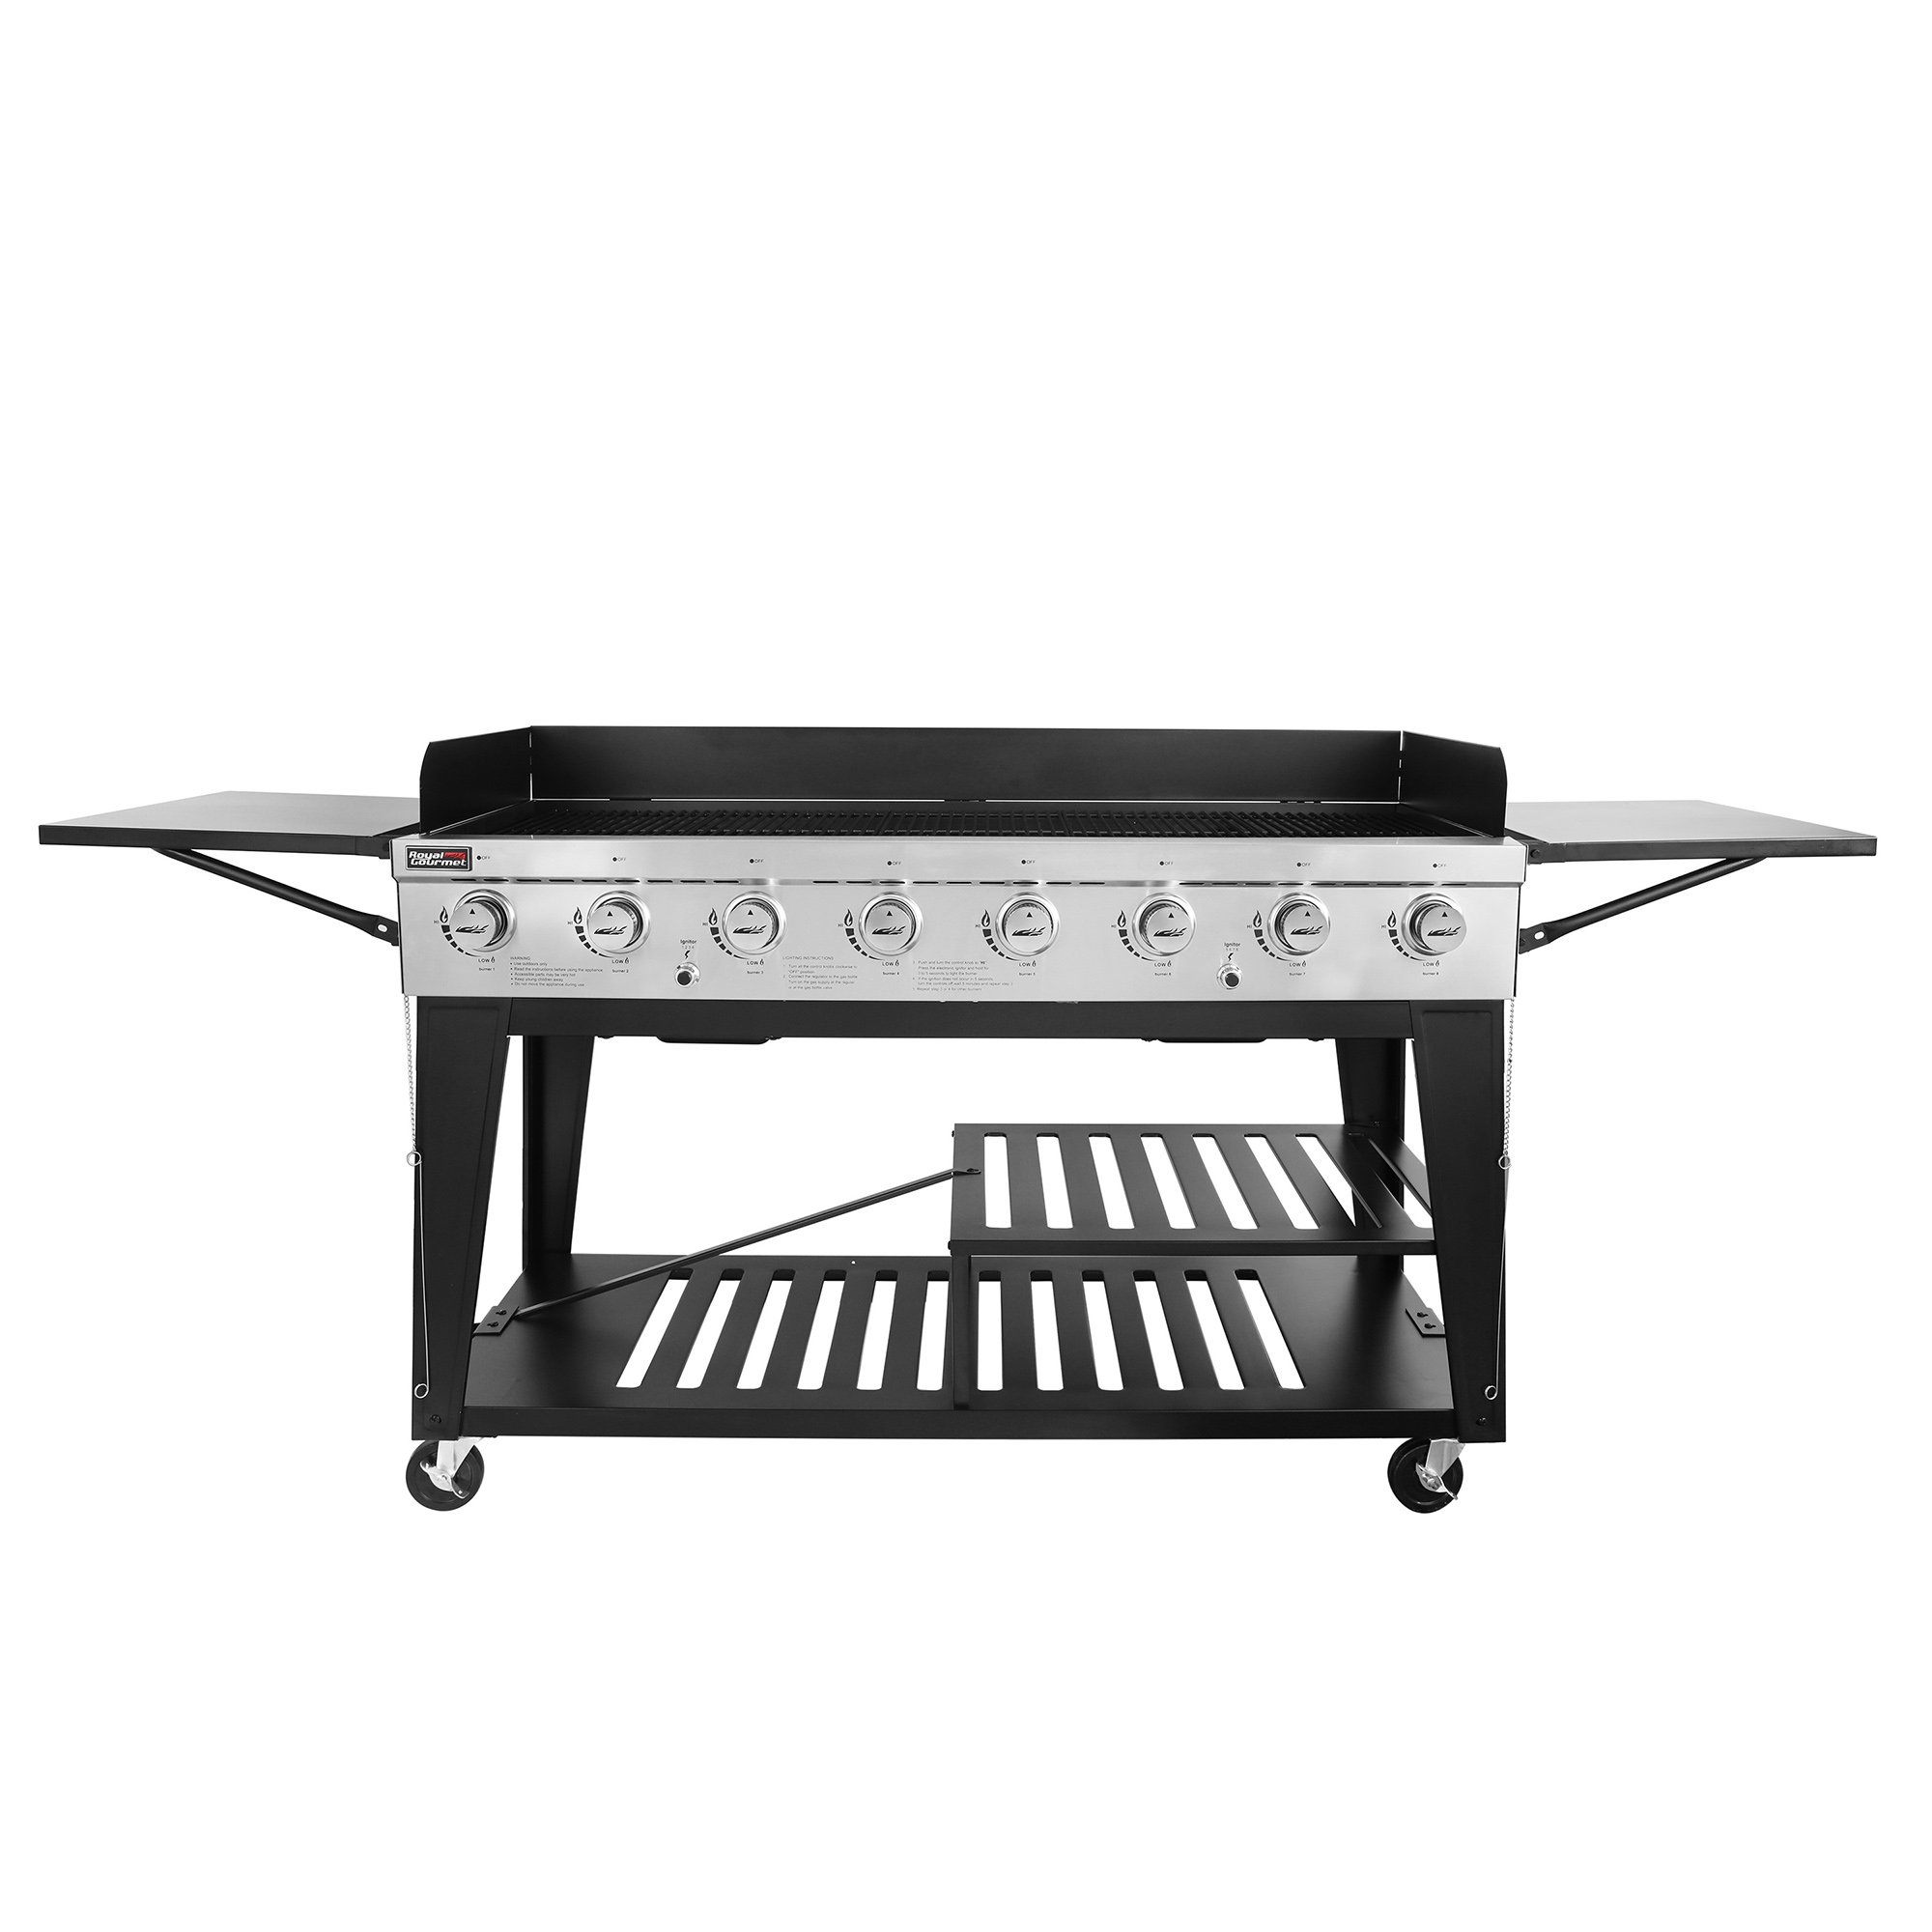 Royal Gourmet GB8001 8-Burner BBQ Gas Propane Grill Outdoor Large Party - image 1 of 12